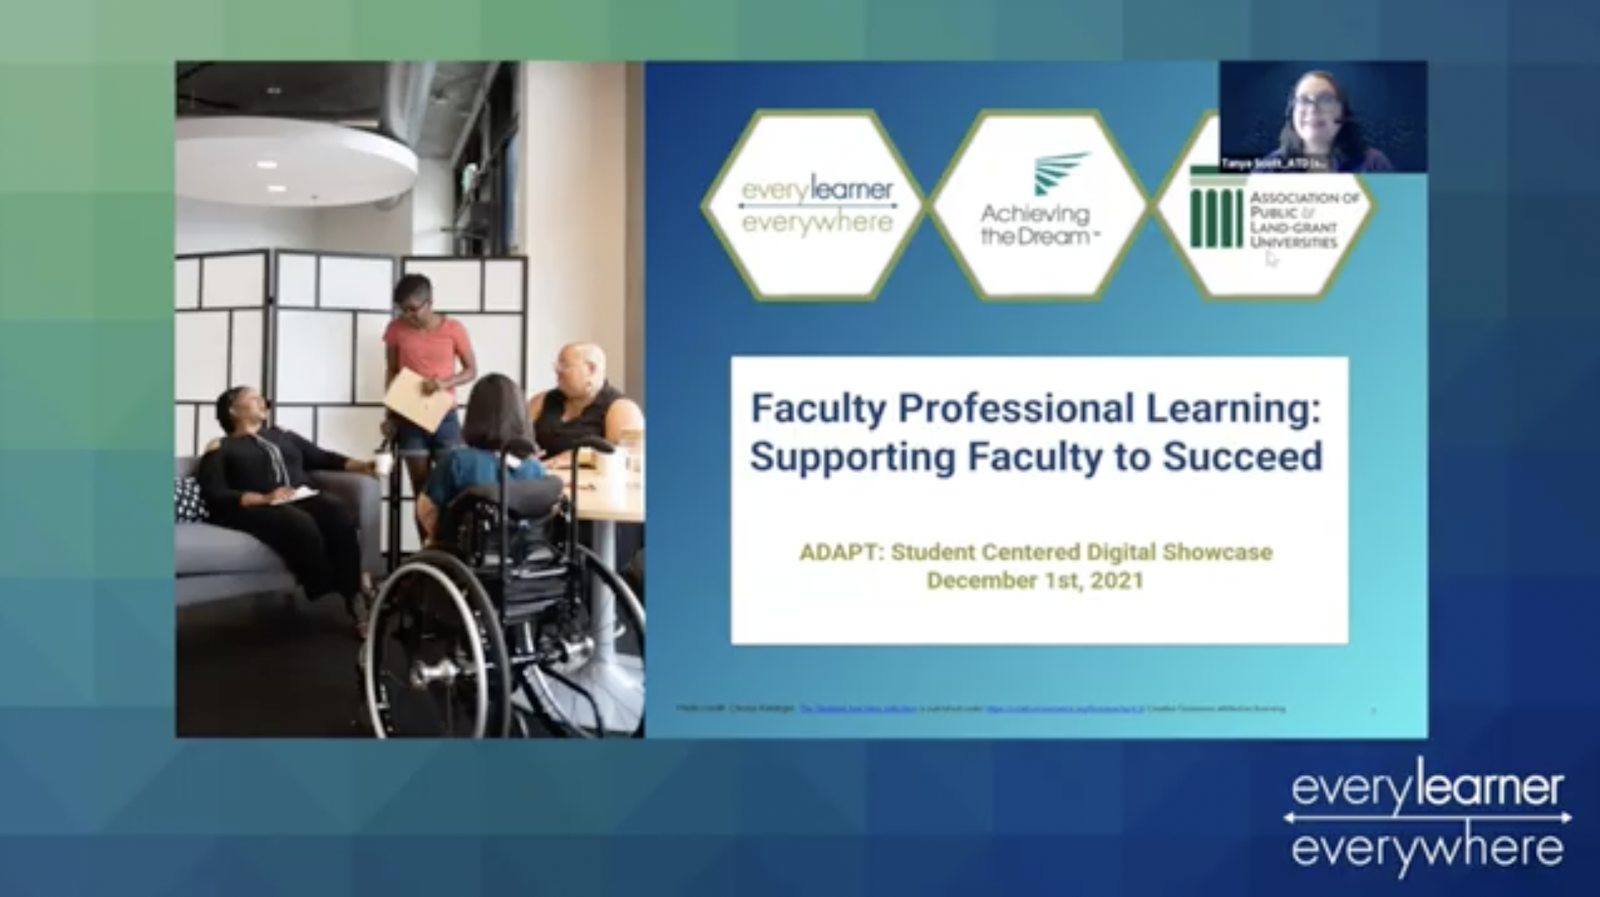 Faculty Professional Learning video screenshot